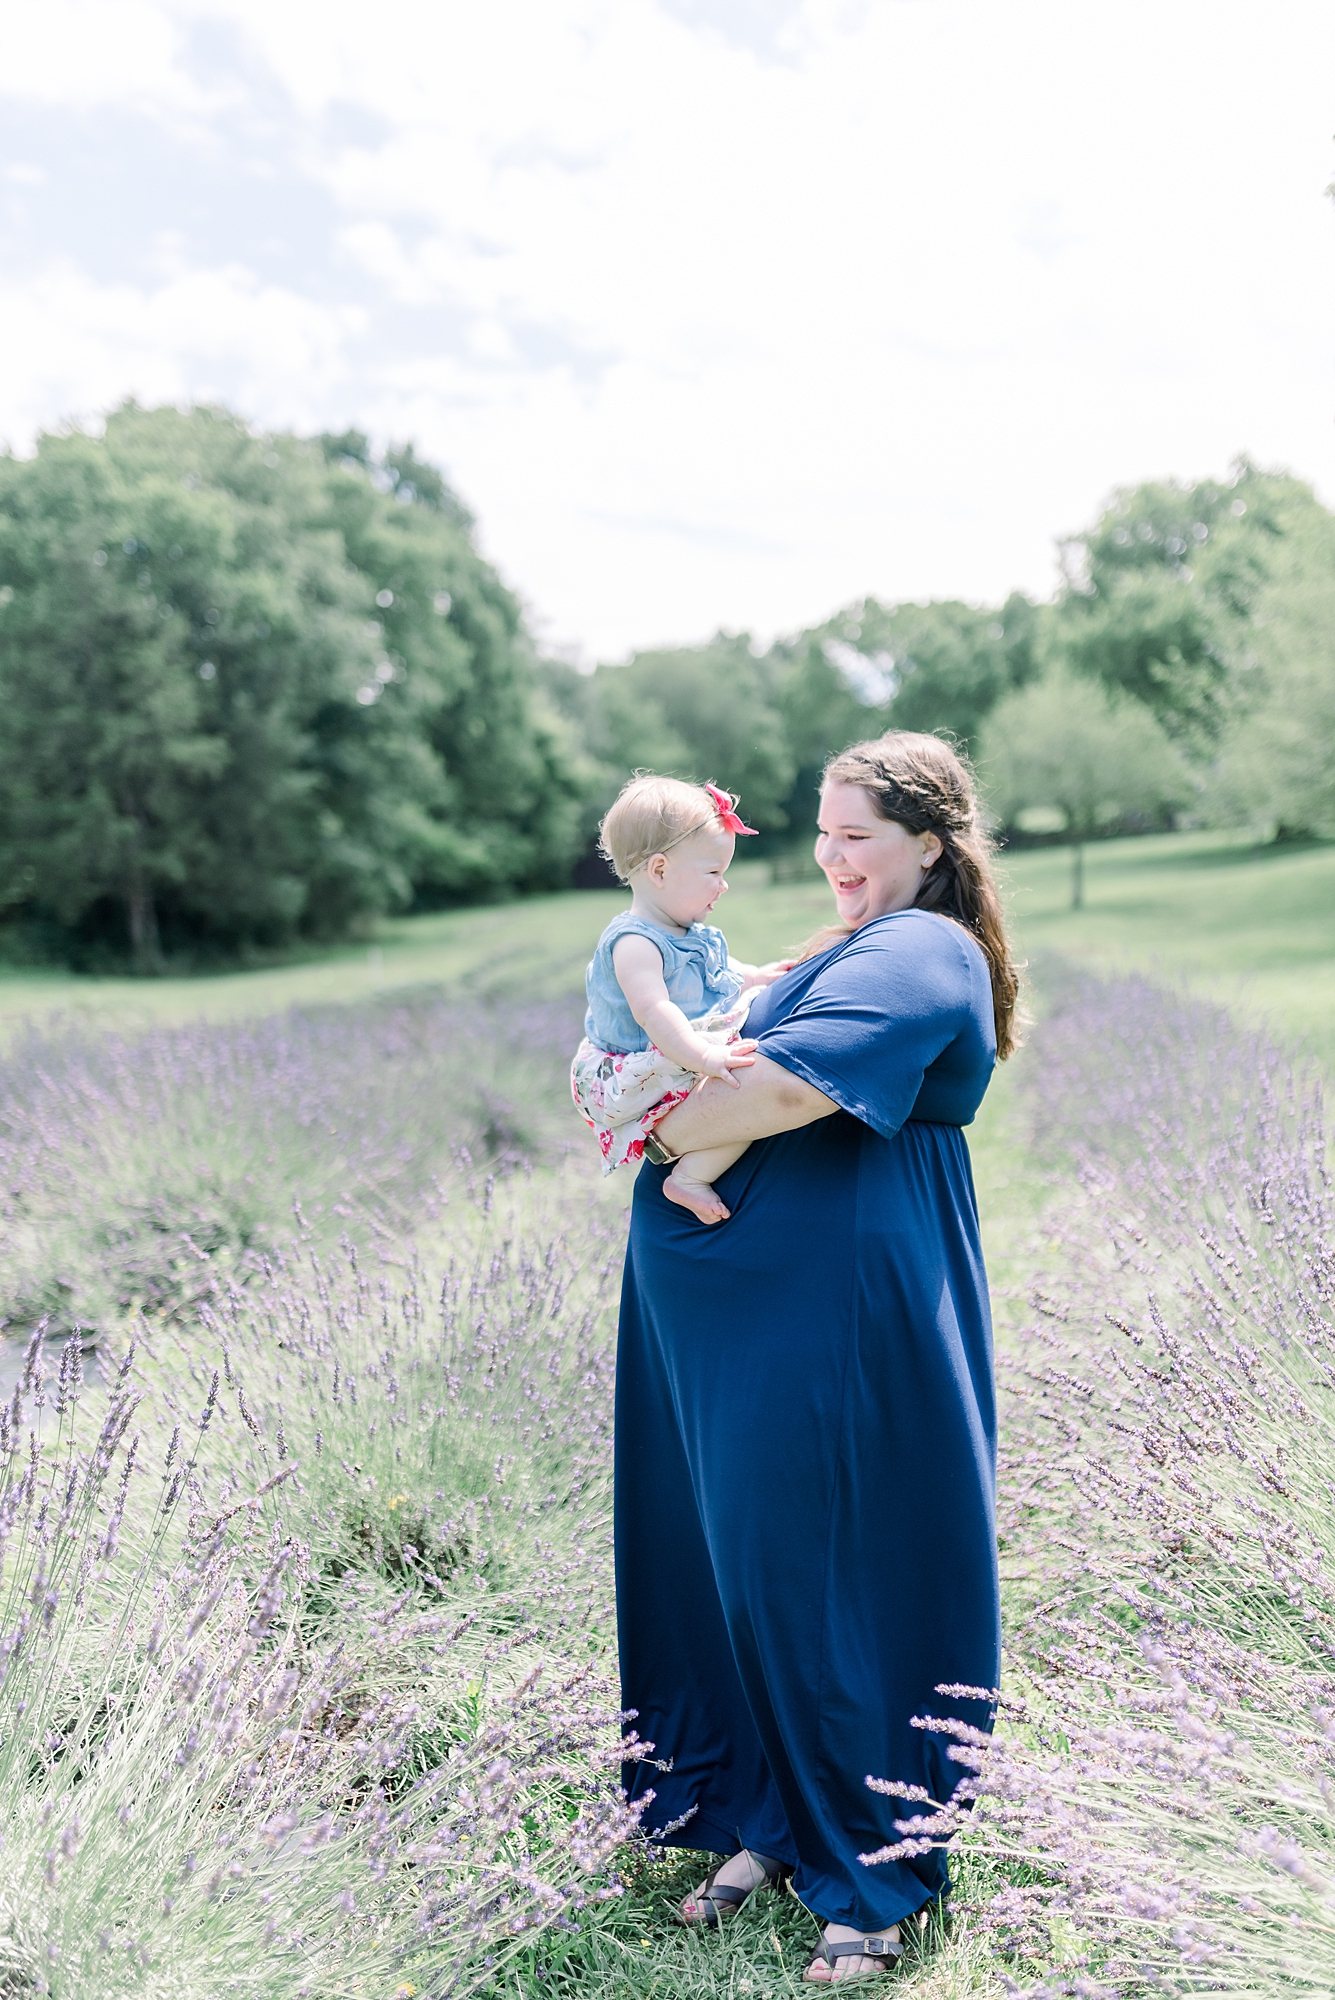 Mom holding baby girl in a lavender field in Nashville TN for girls One Year old Portrait Session Mom is smiling at daughter